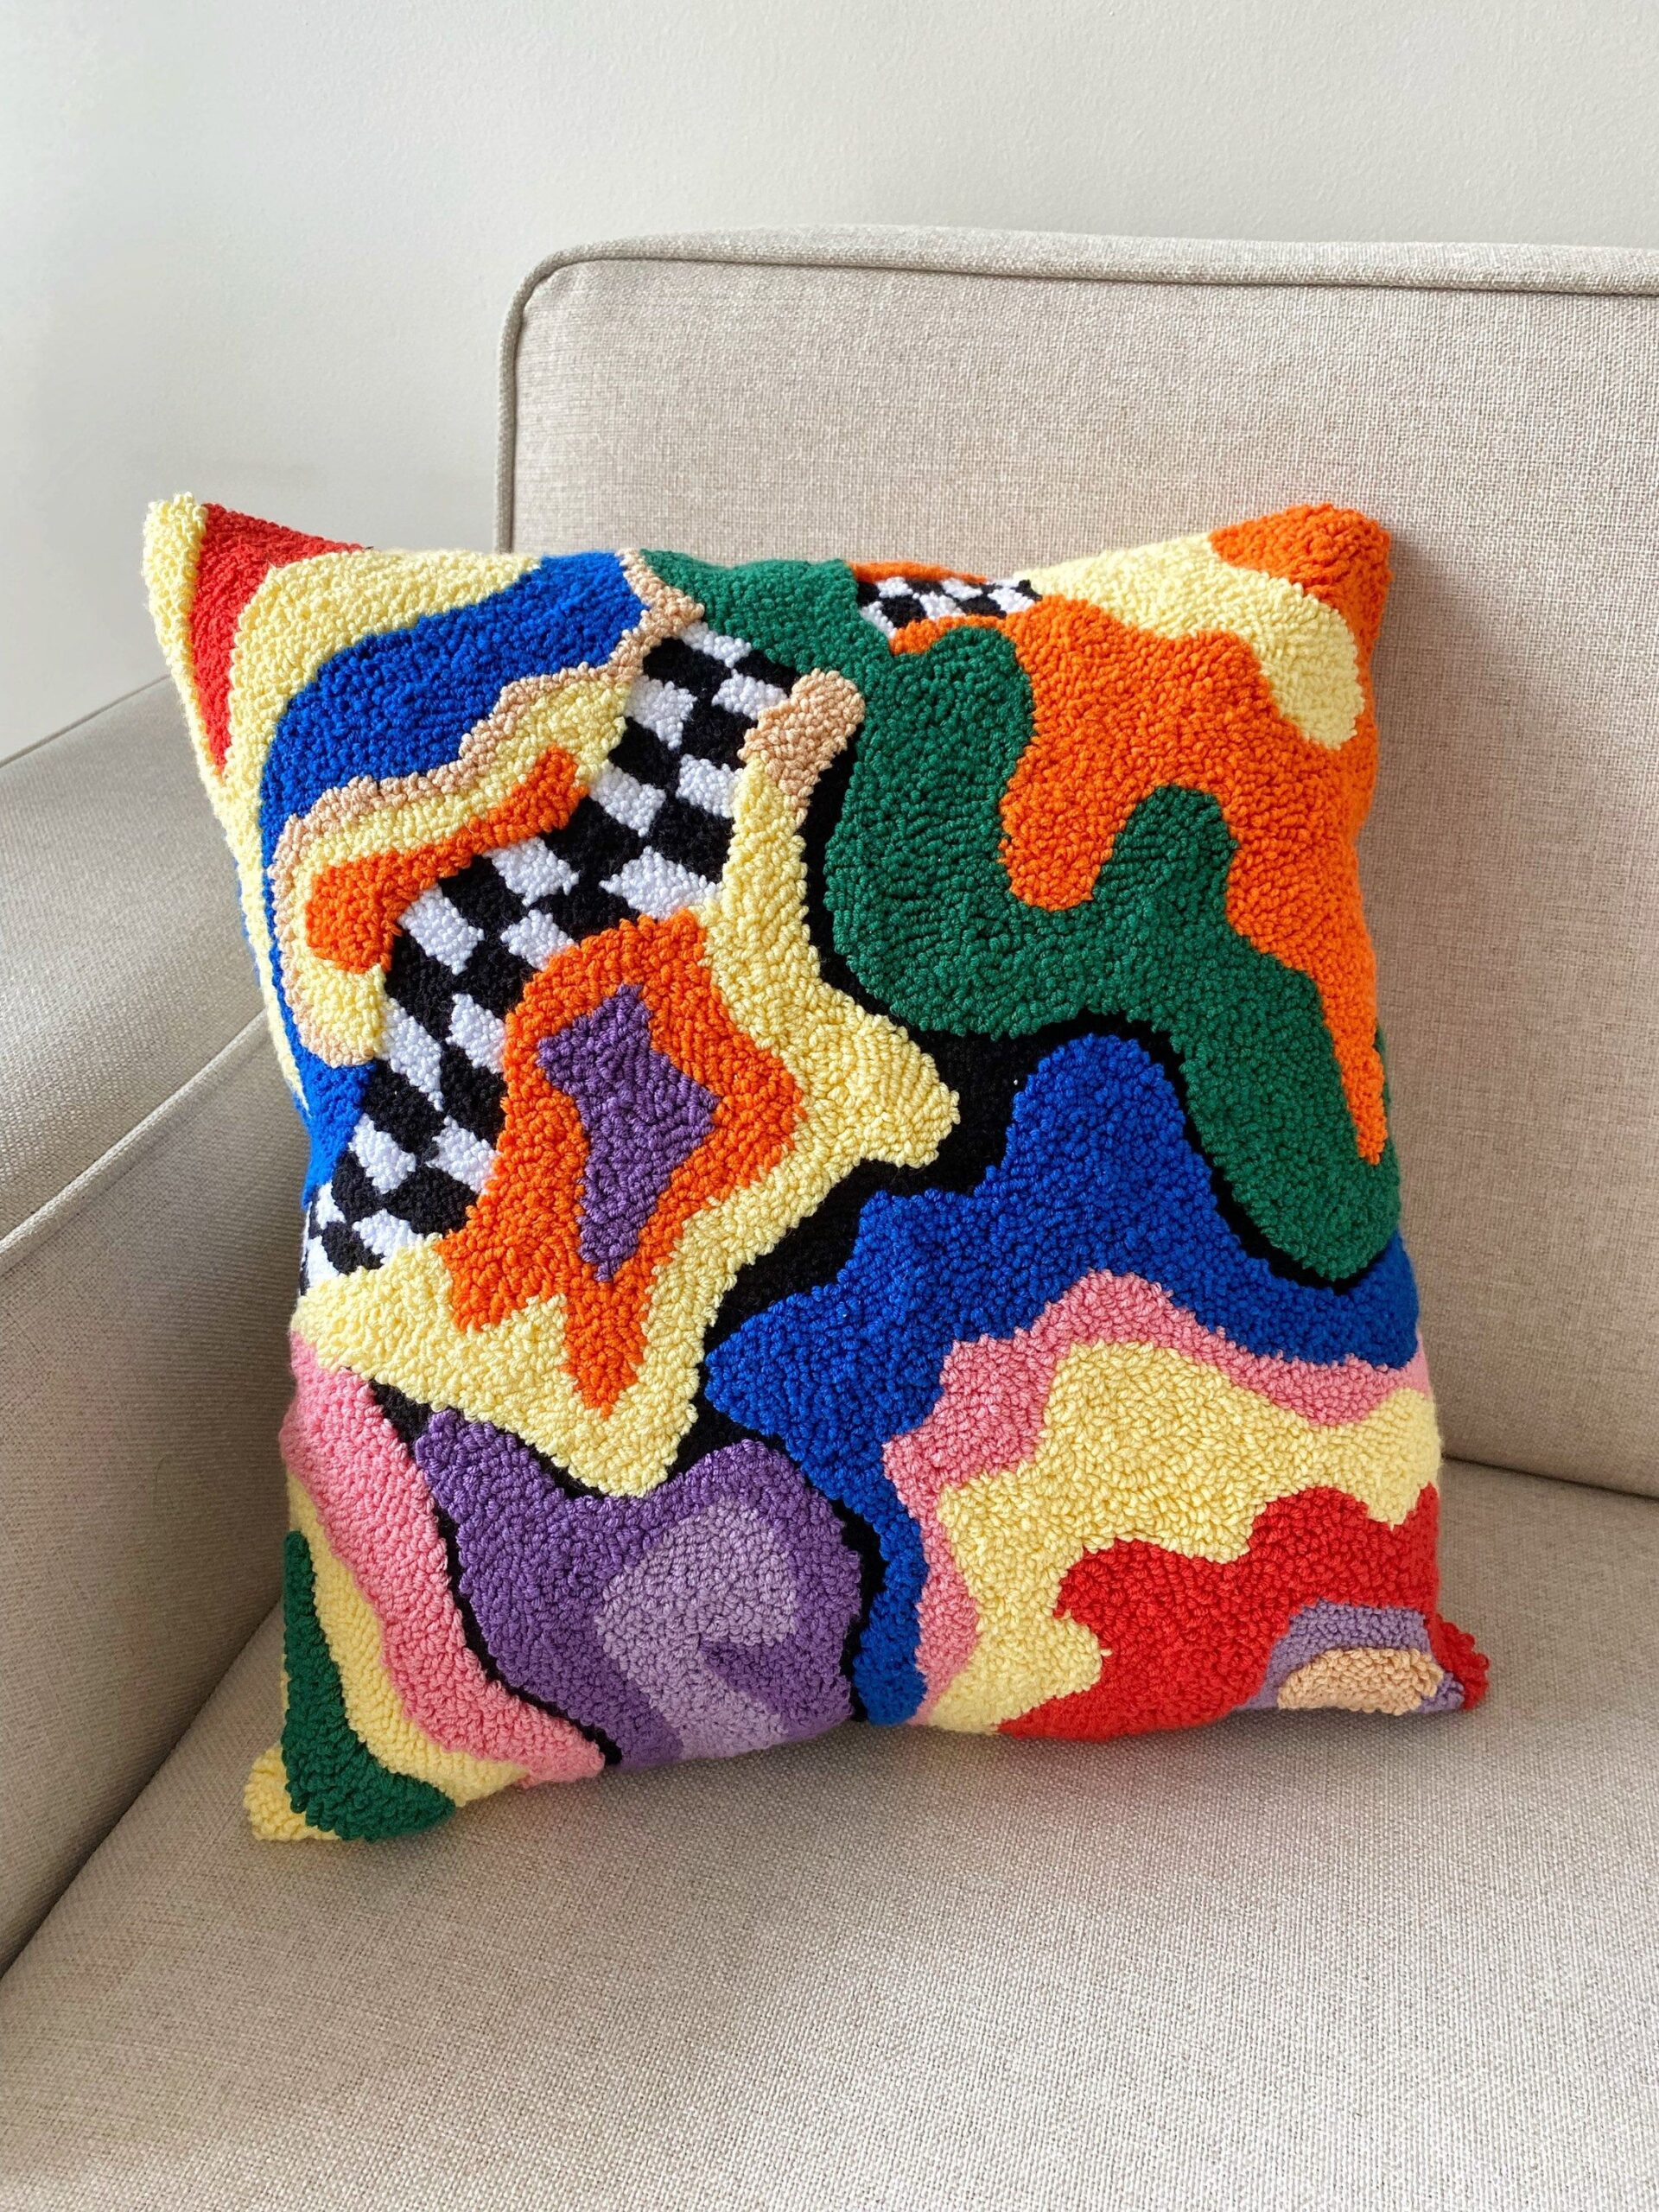 Best Cushion Covers: Styles You’ll Love